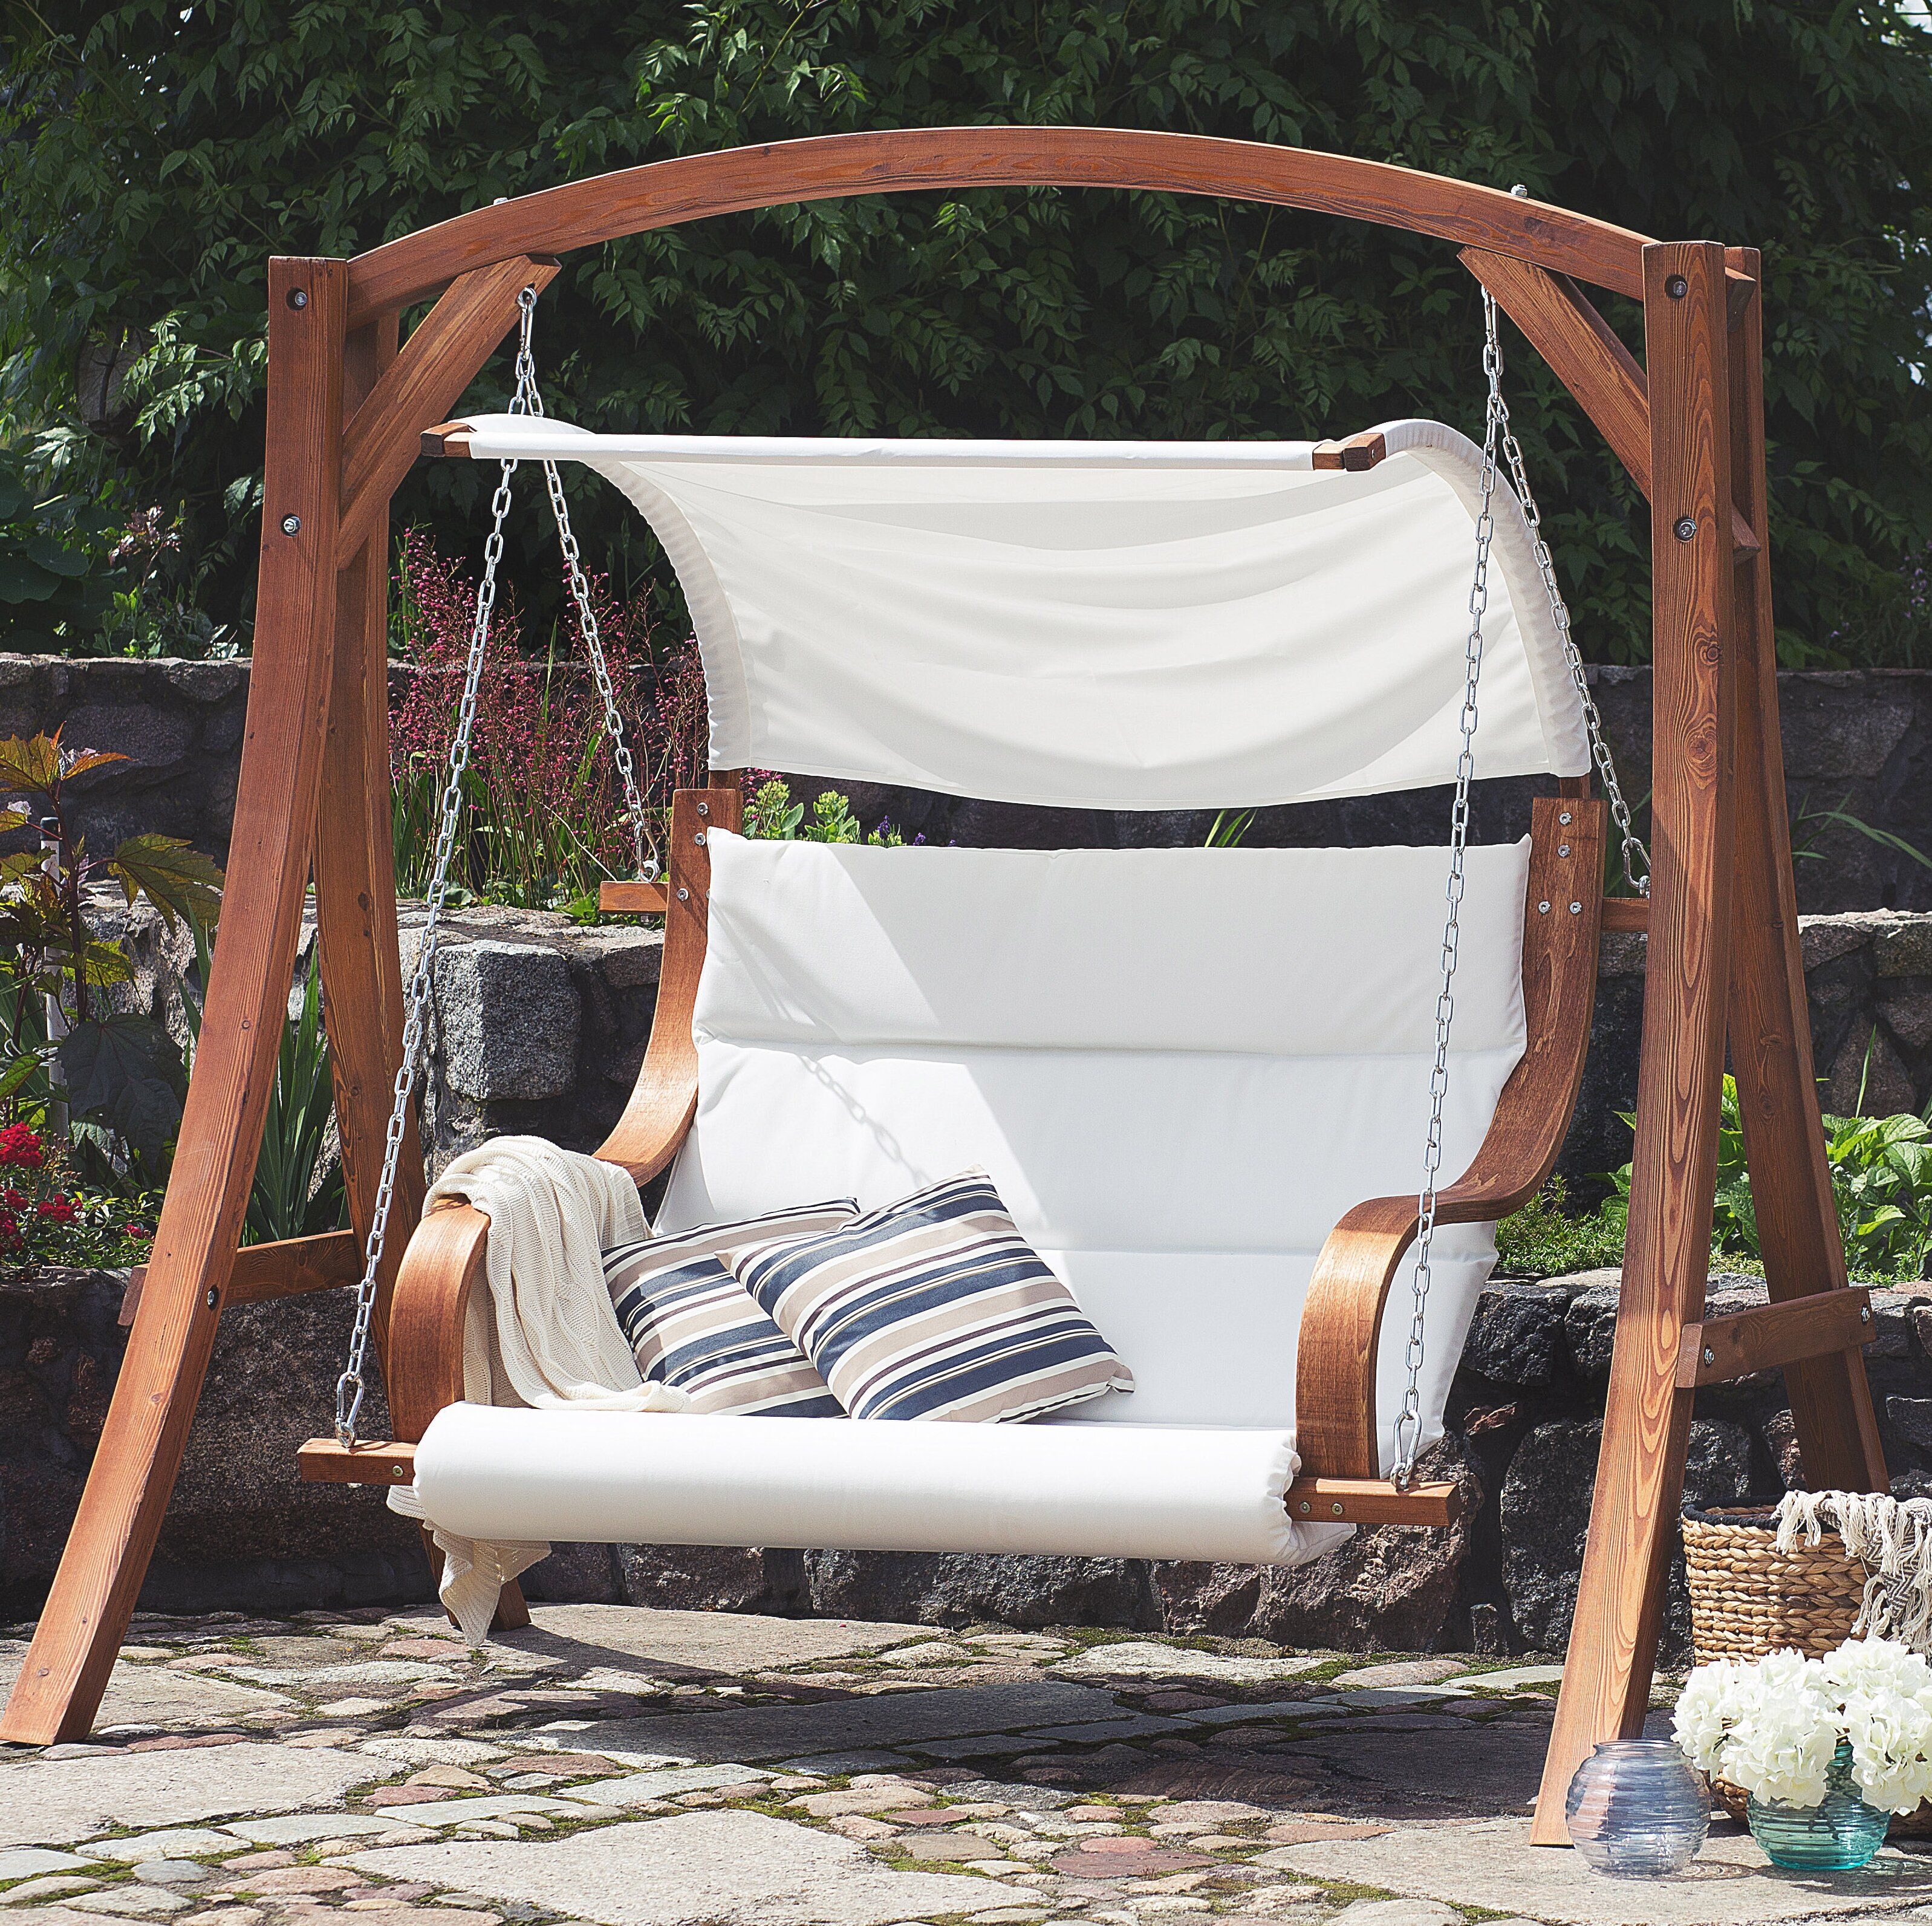 Best Garden Swing Chairs For Summer 2021, Outdoor Furniture Swing Seat